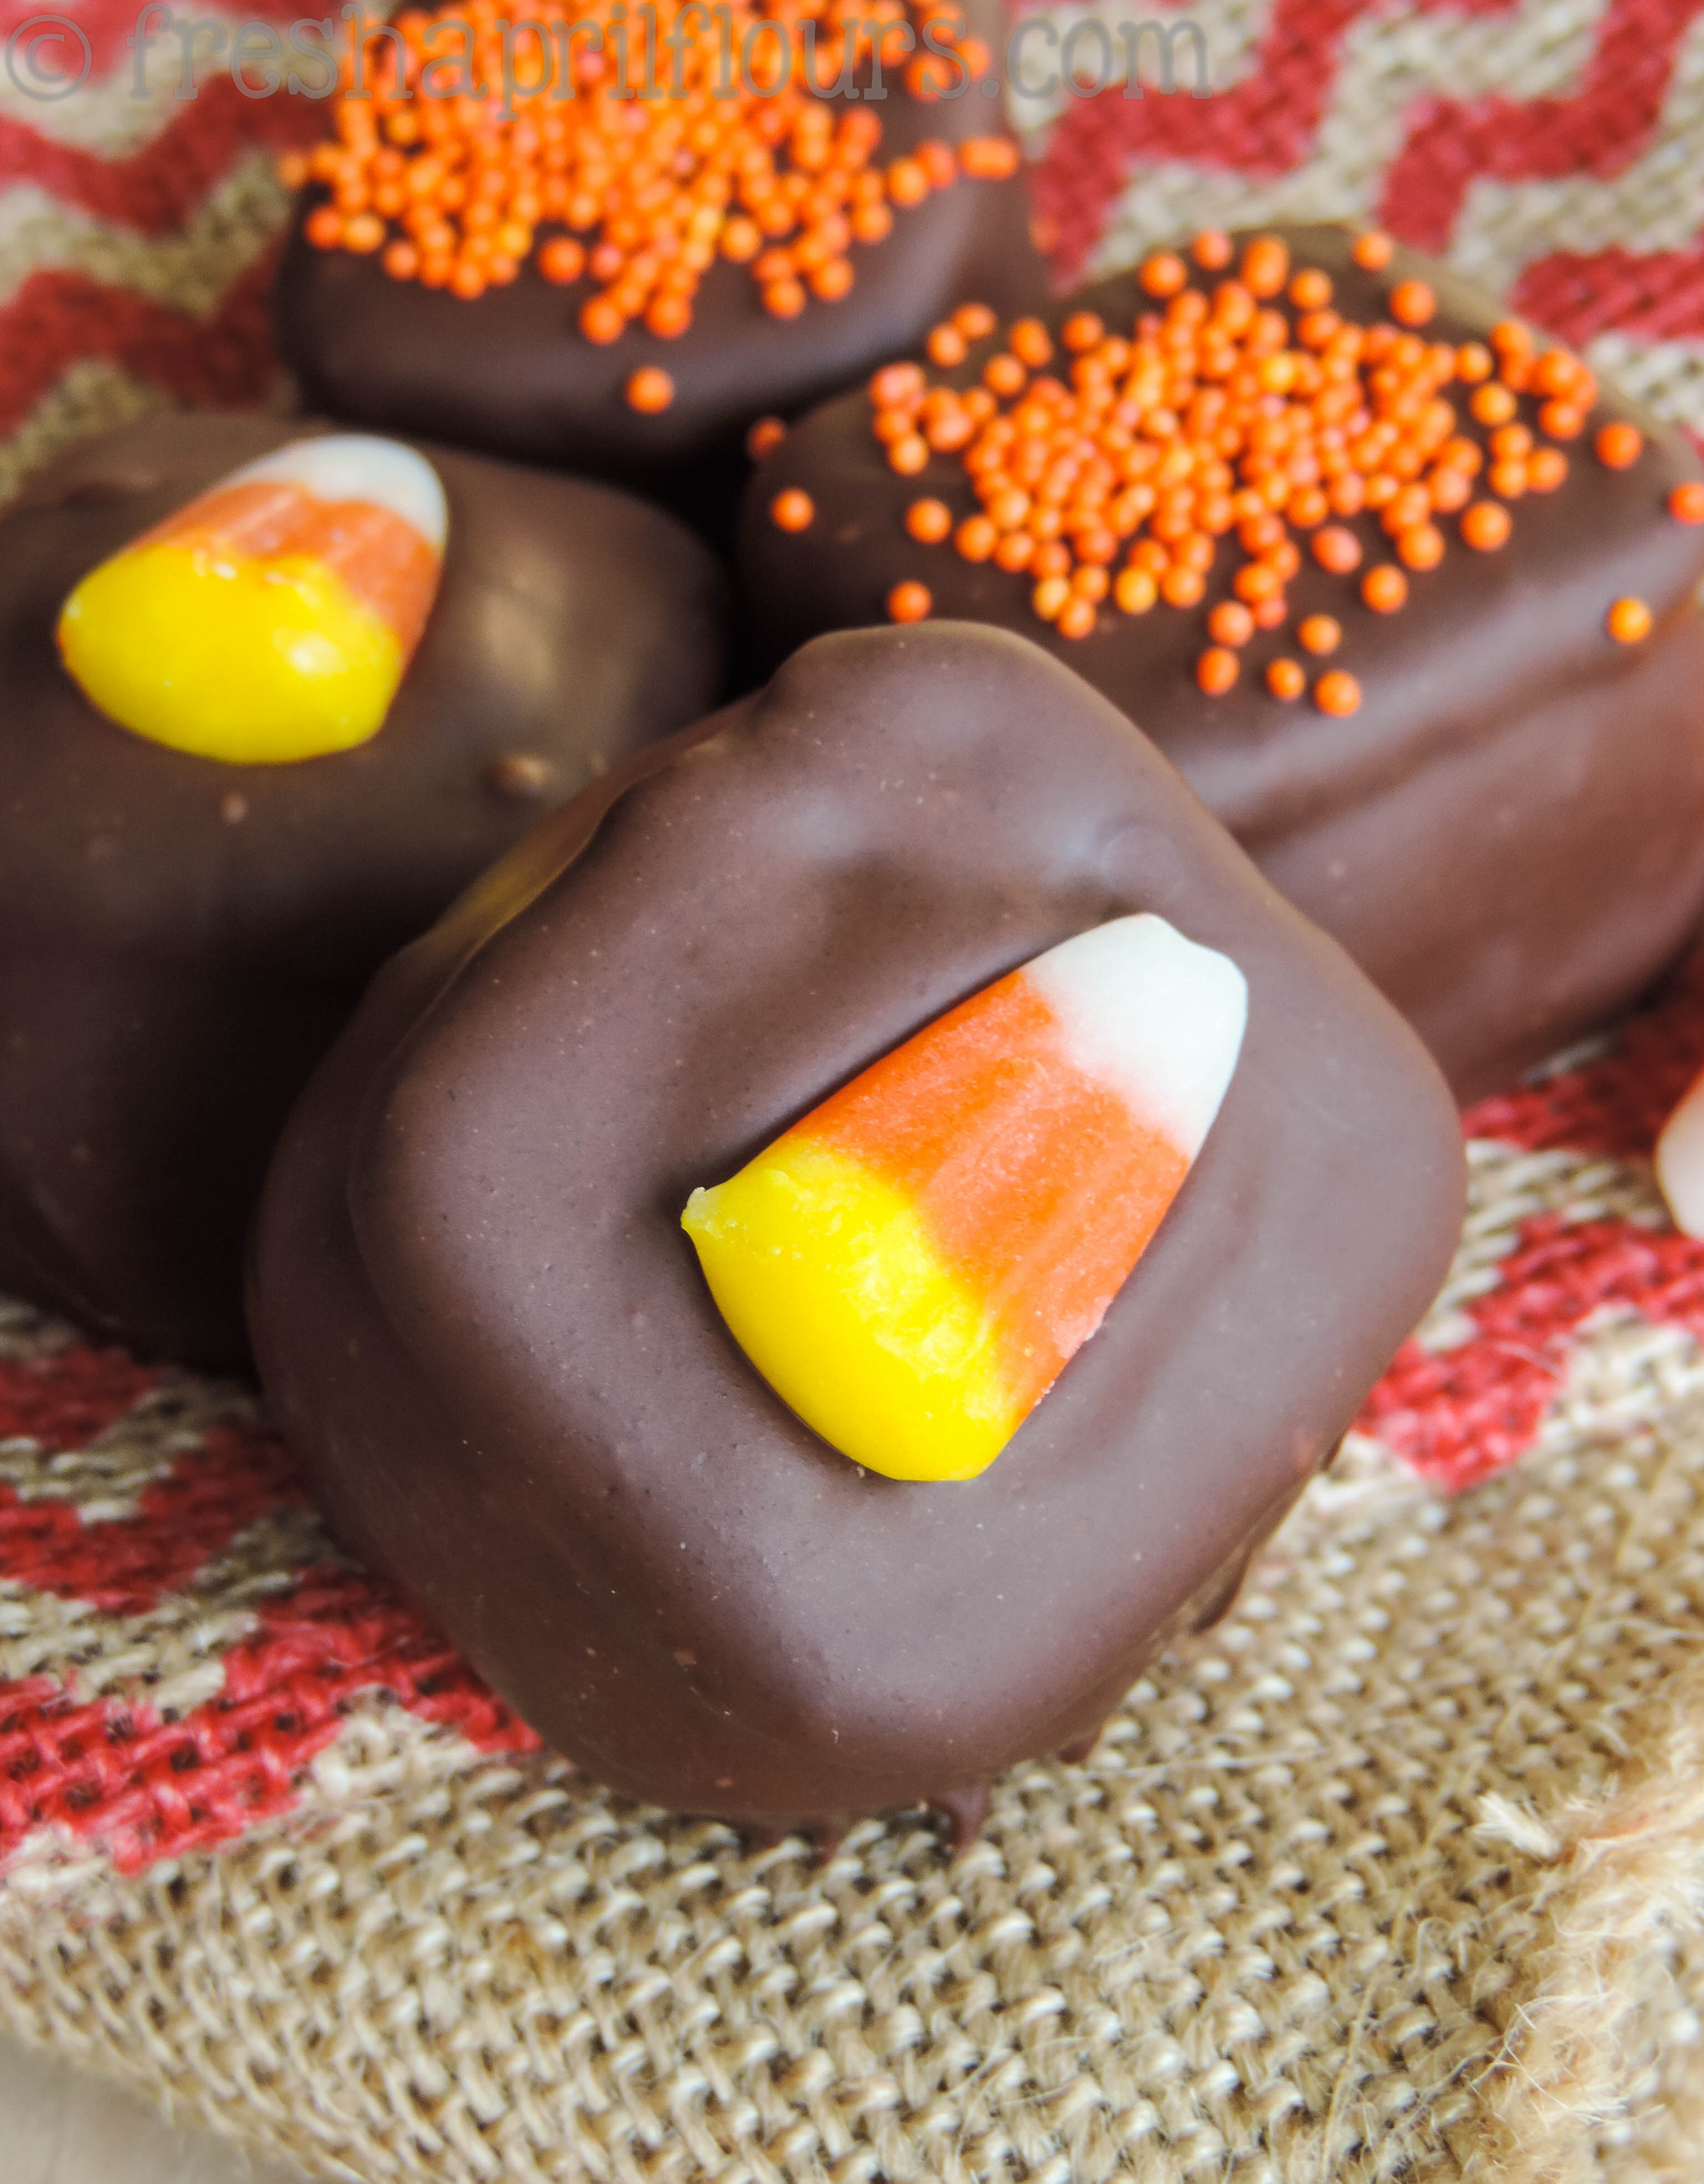 A gooey, nutty, and spicy blend of pumpkin and peanut butter, sandwiched between two pretzels and topped off with a chocolate coating. This is one flavor combination you must try for fall!